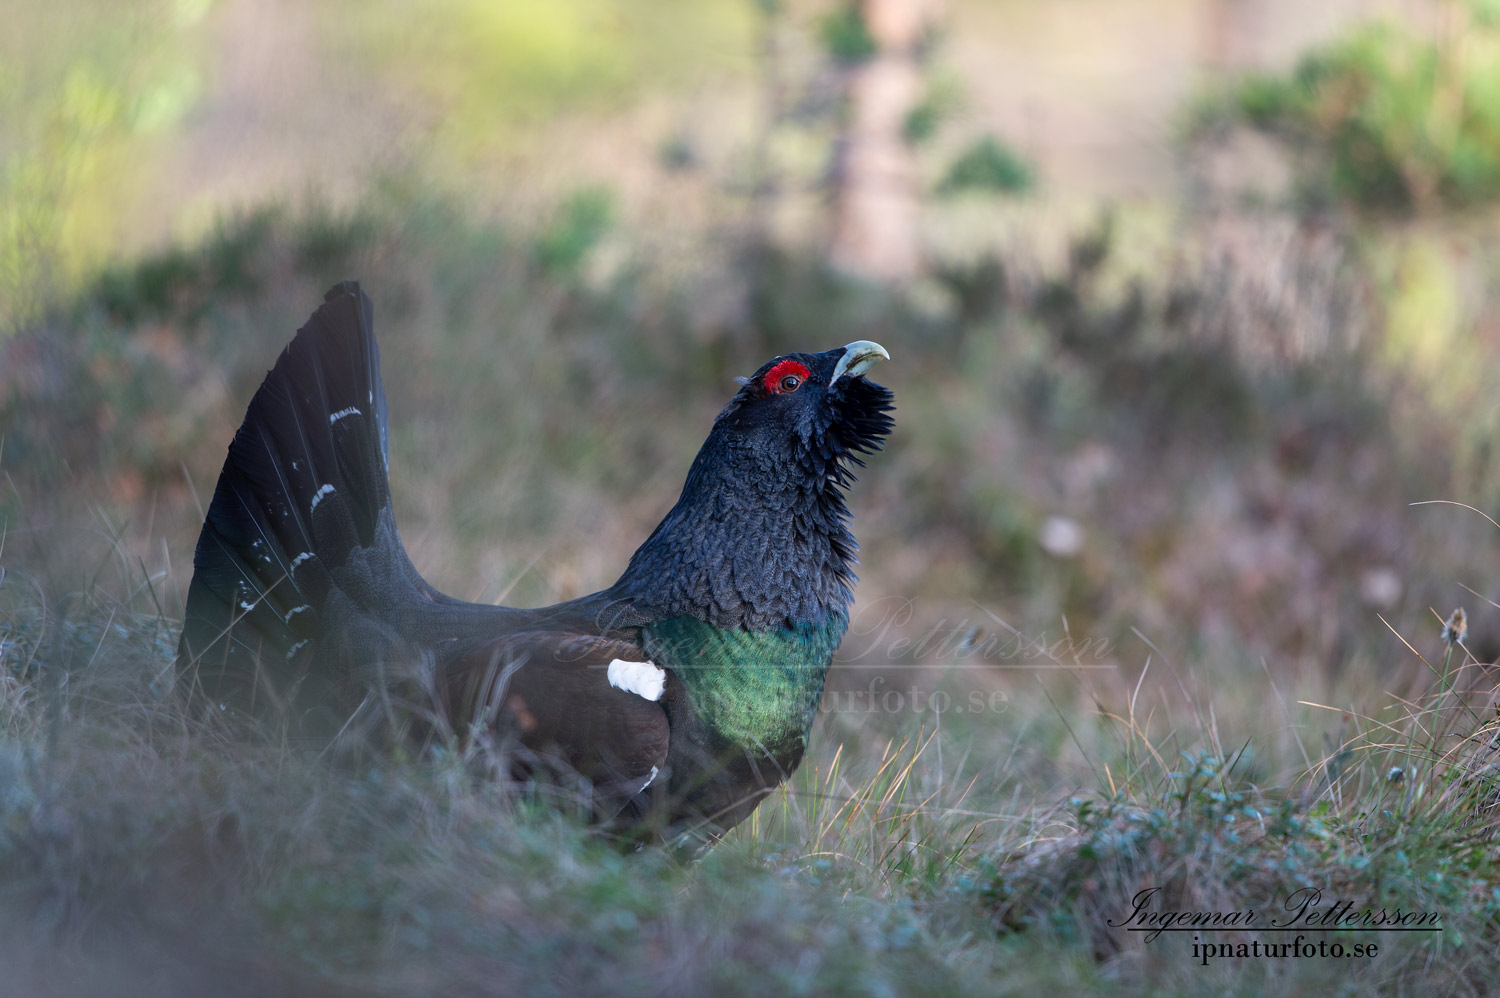 tjader_ipnaturfoto_capercaillie_se_forest_fo616